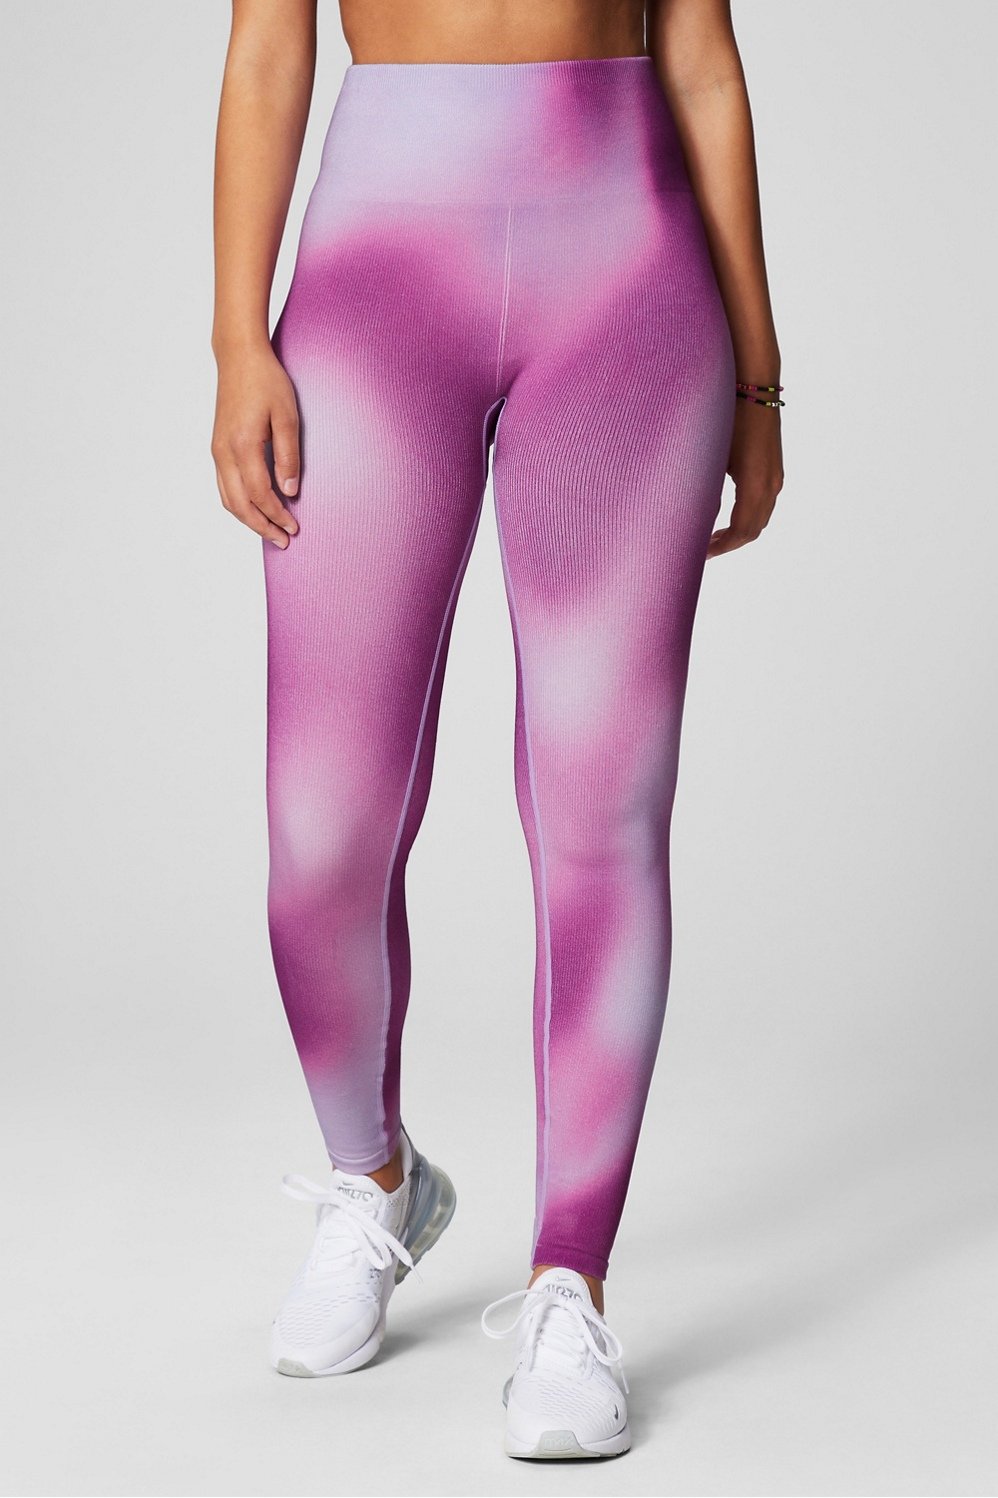 Women's Seamless High-Rise Leggings - All In Motion™ Lilac Purple XXL